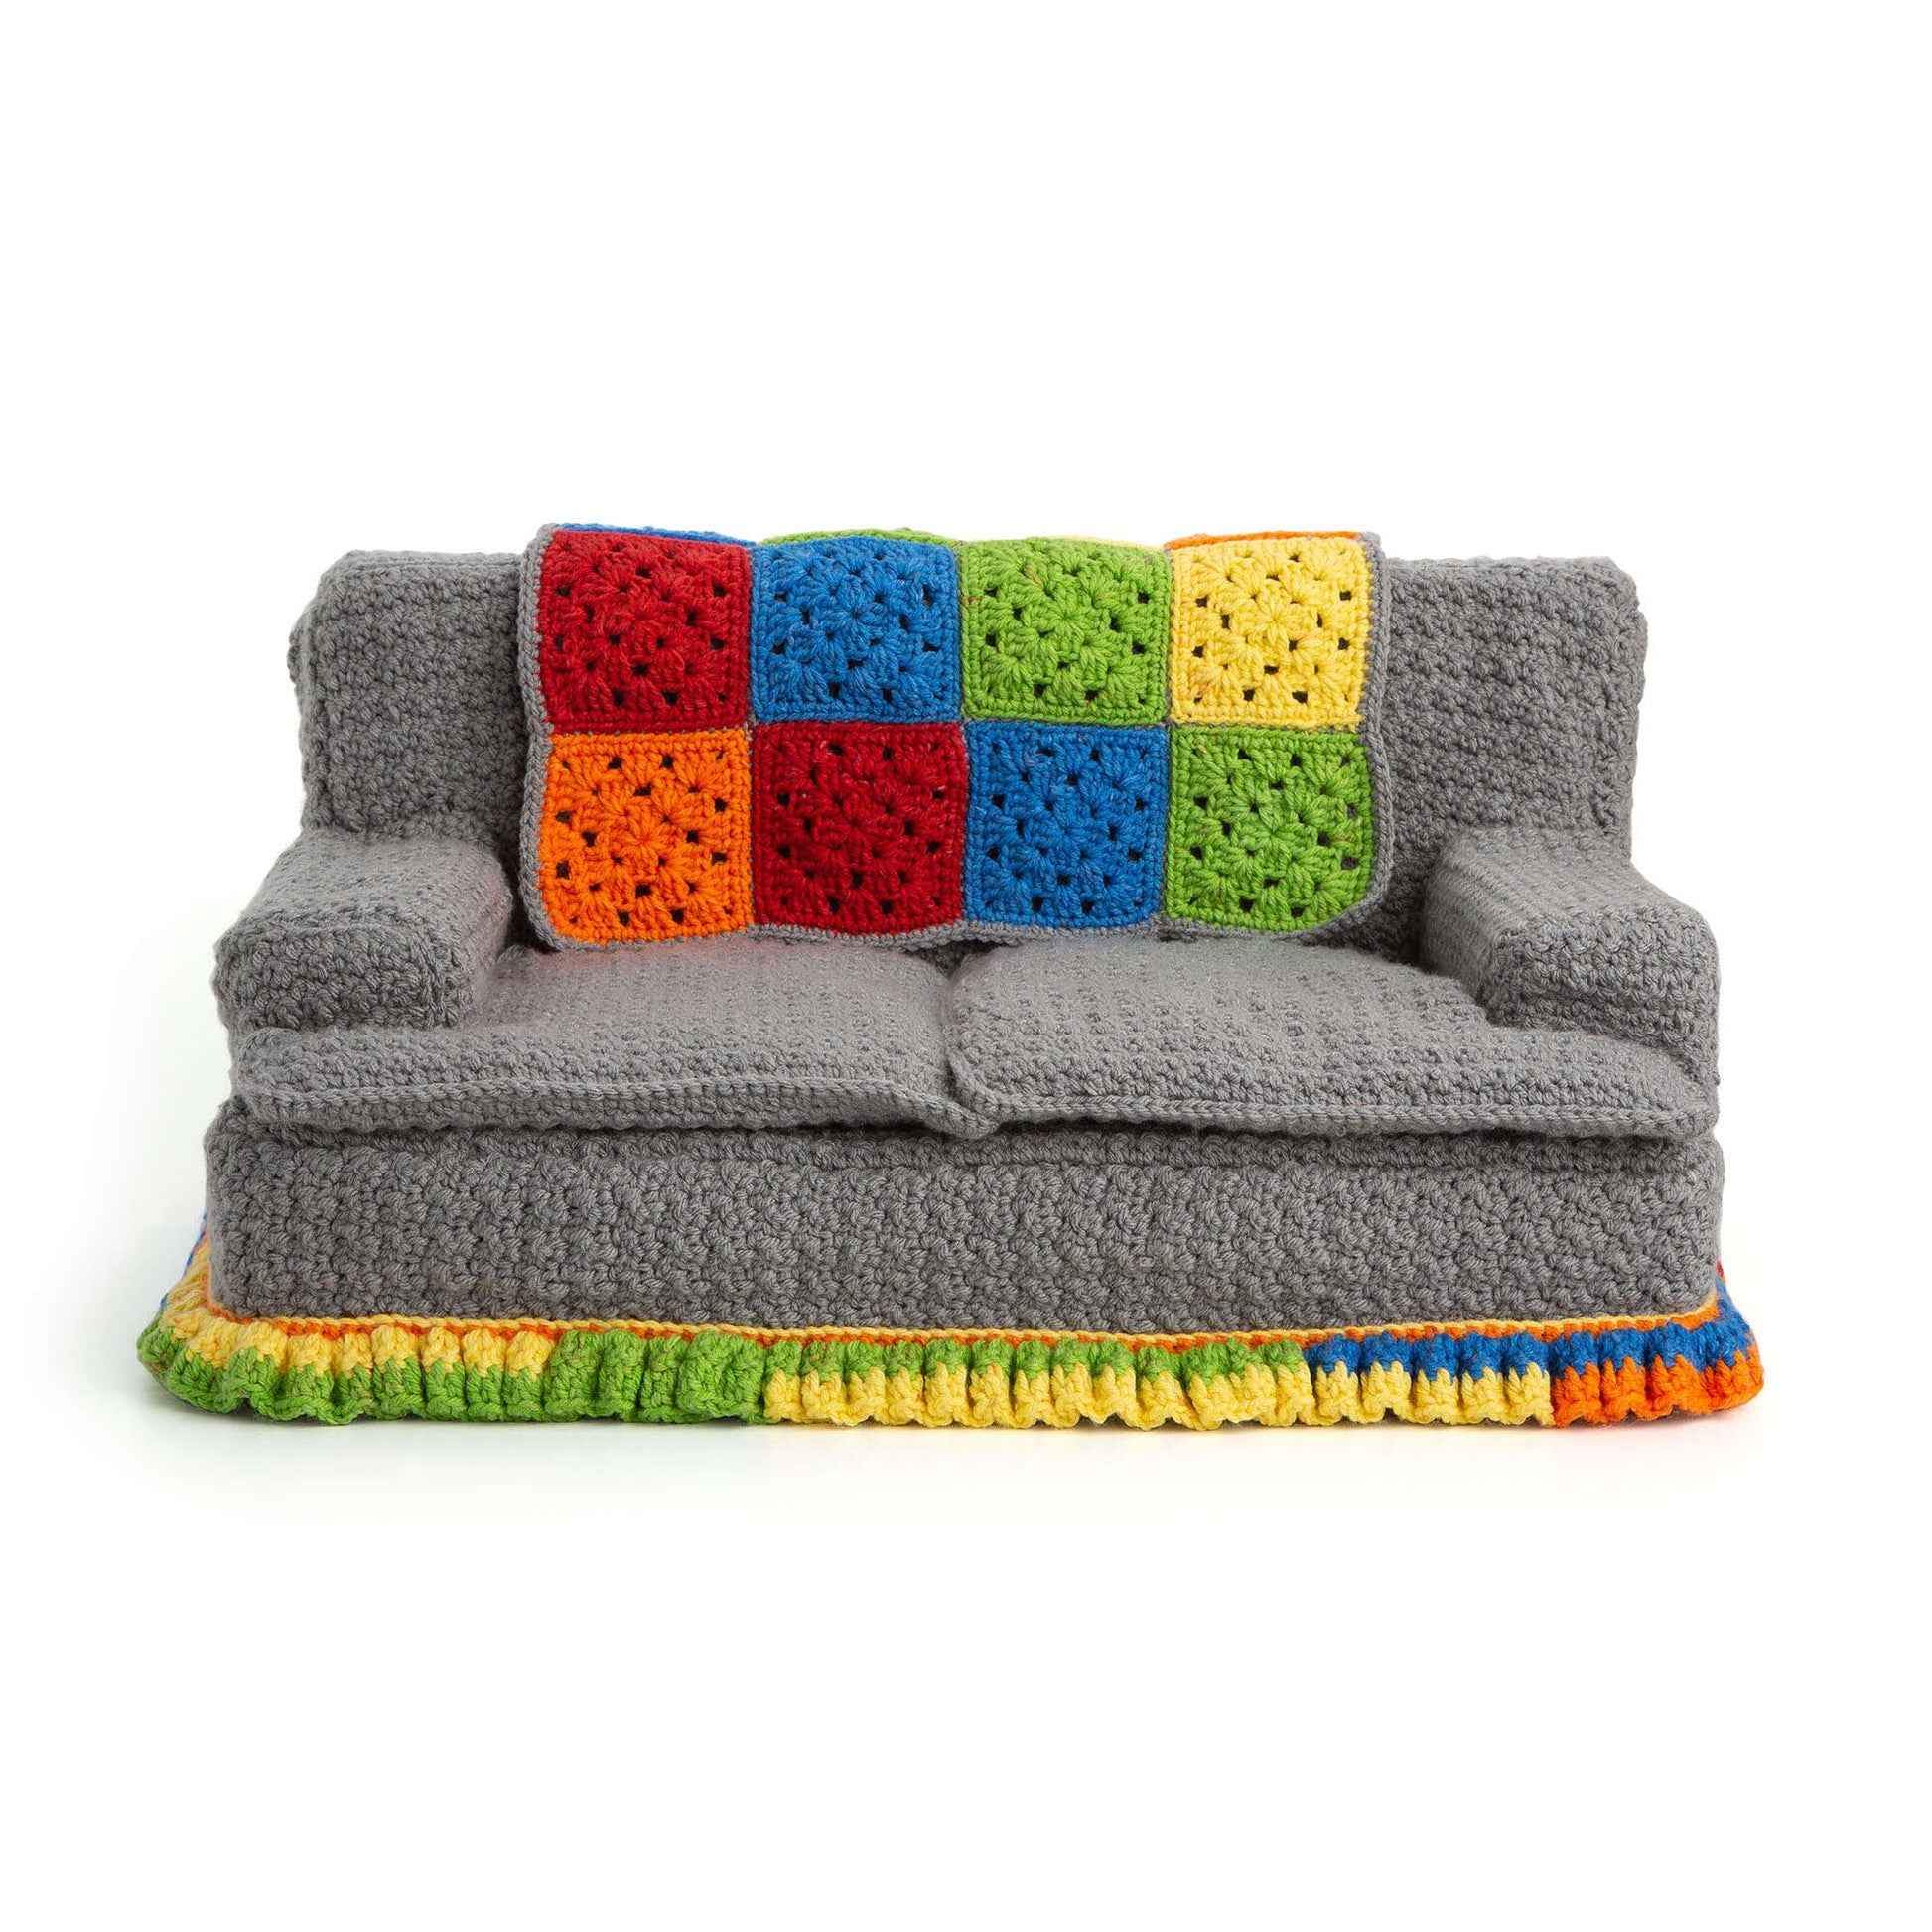 Red Heart Crochet Cat Couch Pattern | Yarnspirations